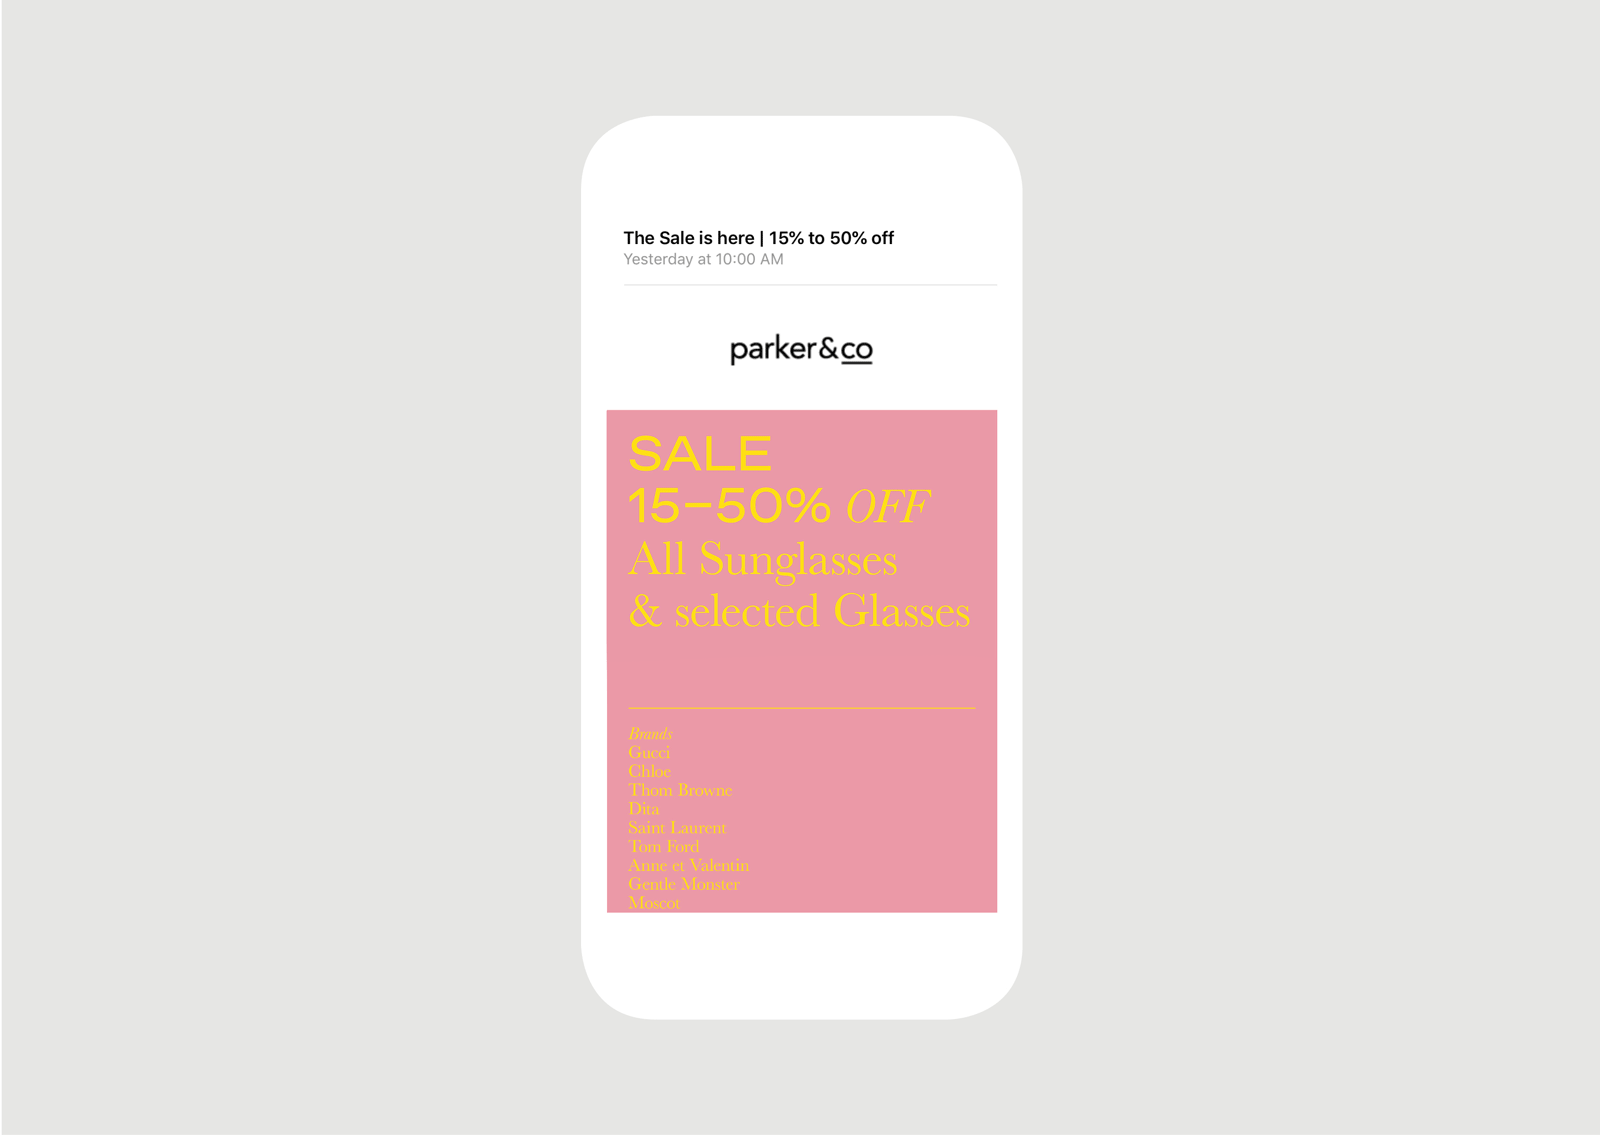 Parker and Co Winter Sale EDM – features animated messaging in yellow and blush pink block colour and modern typography